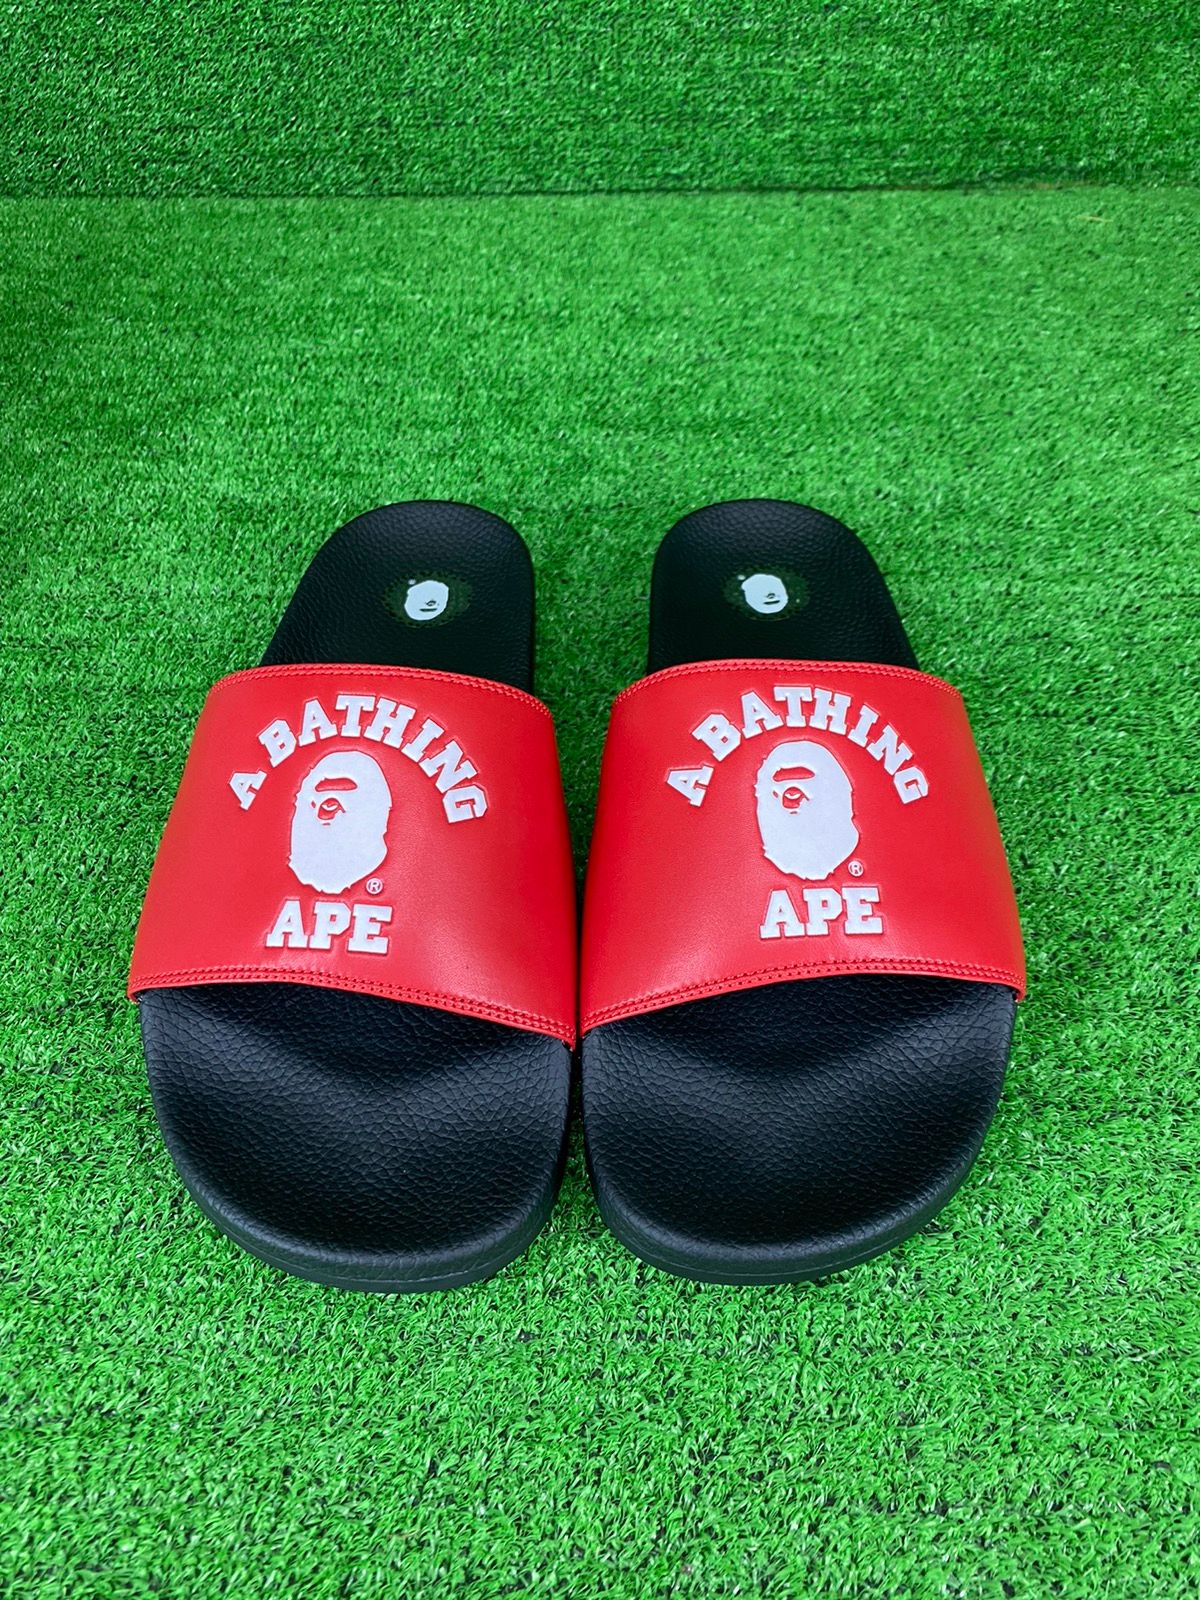 Pre-owned Bape College Slides Red Size 11